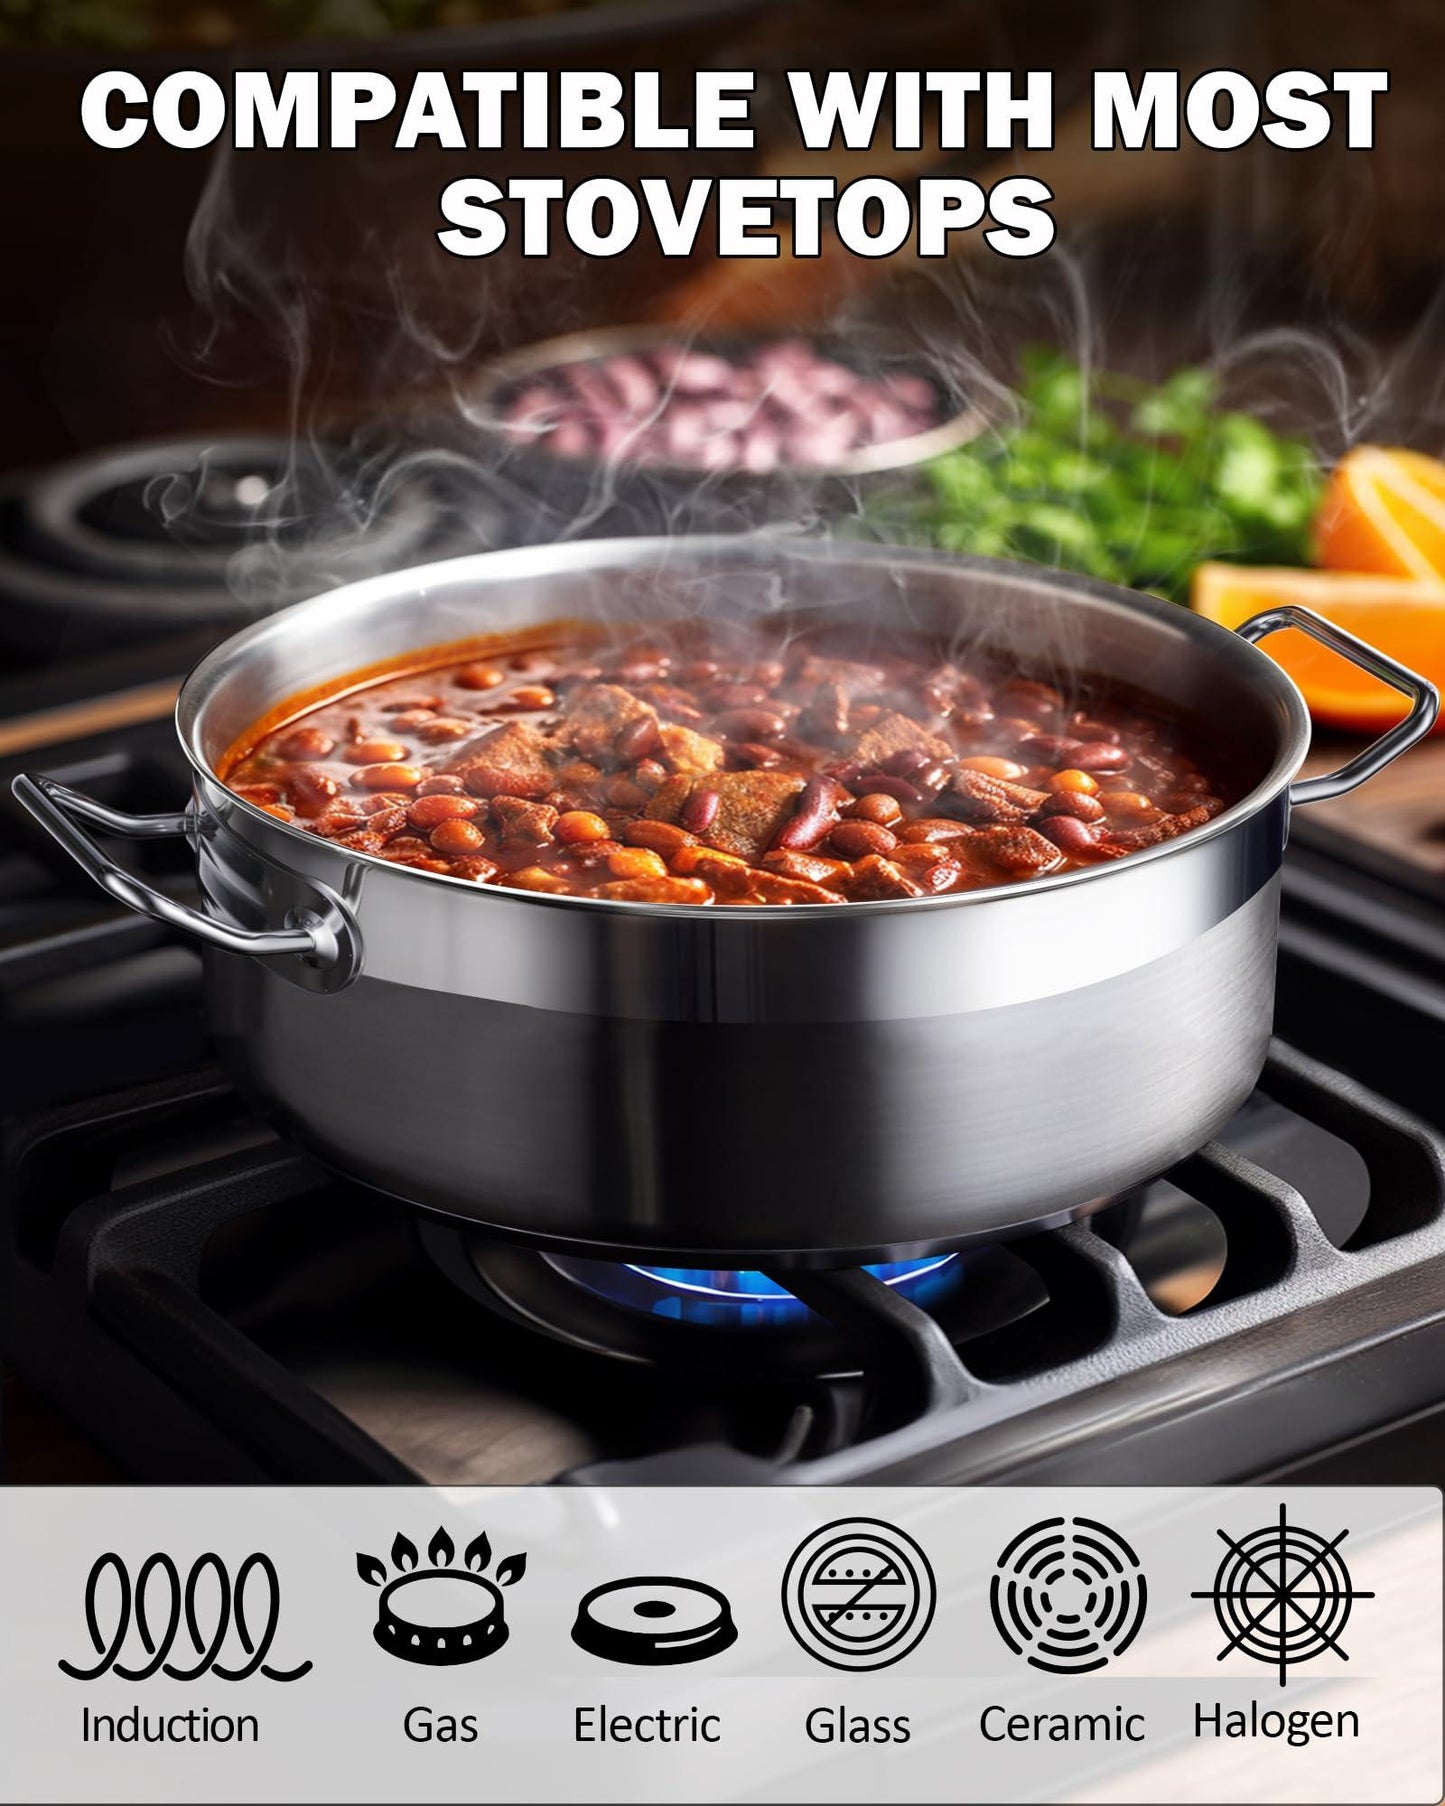 Cooks Standard Deep Sauté Pan with Lid, 4-Quart Professional Deep Frying Pan 18/10 Stainless Steel Chef’s All Purpose Pan with Cover, Compatible with All Stovetops - CookCave